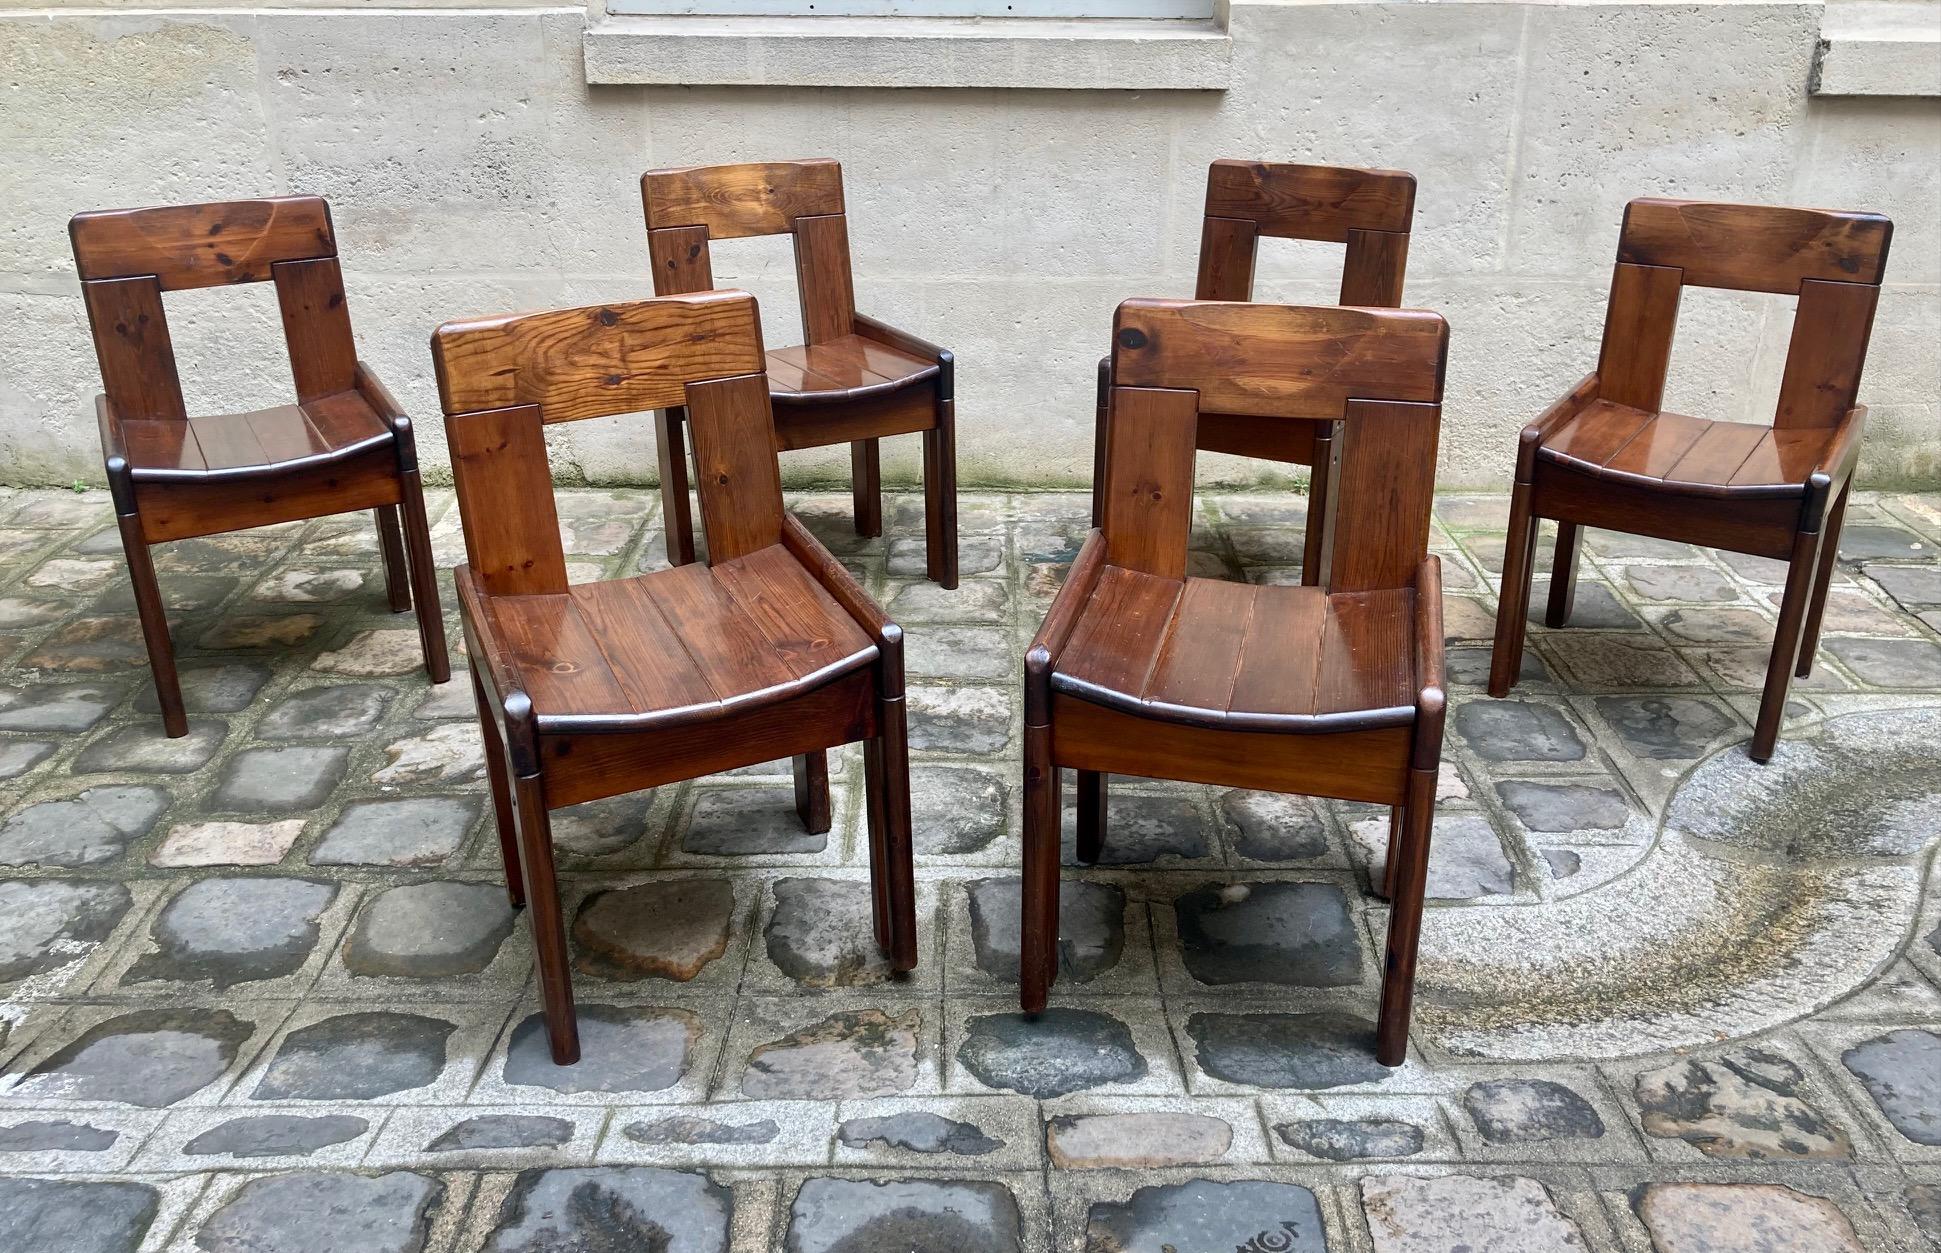 A set of 6 dining chairs by Silvio Coppola ( 1920 -1986) for Fratelli Montina. 
Stained pine wood, rich patina with nice glow. 
Constructivist design with brutalist approach. 
Italy, circa 1970

Dimensions : 
Height : 77 cm / 30,3 inch
Width